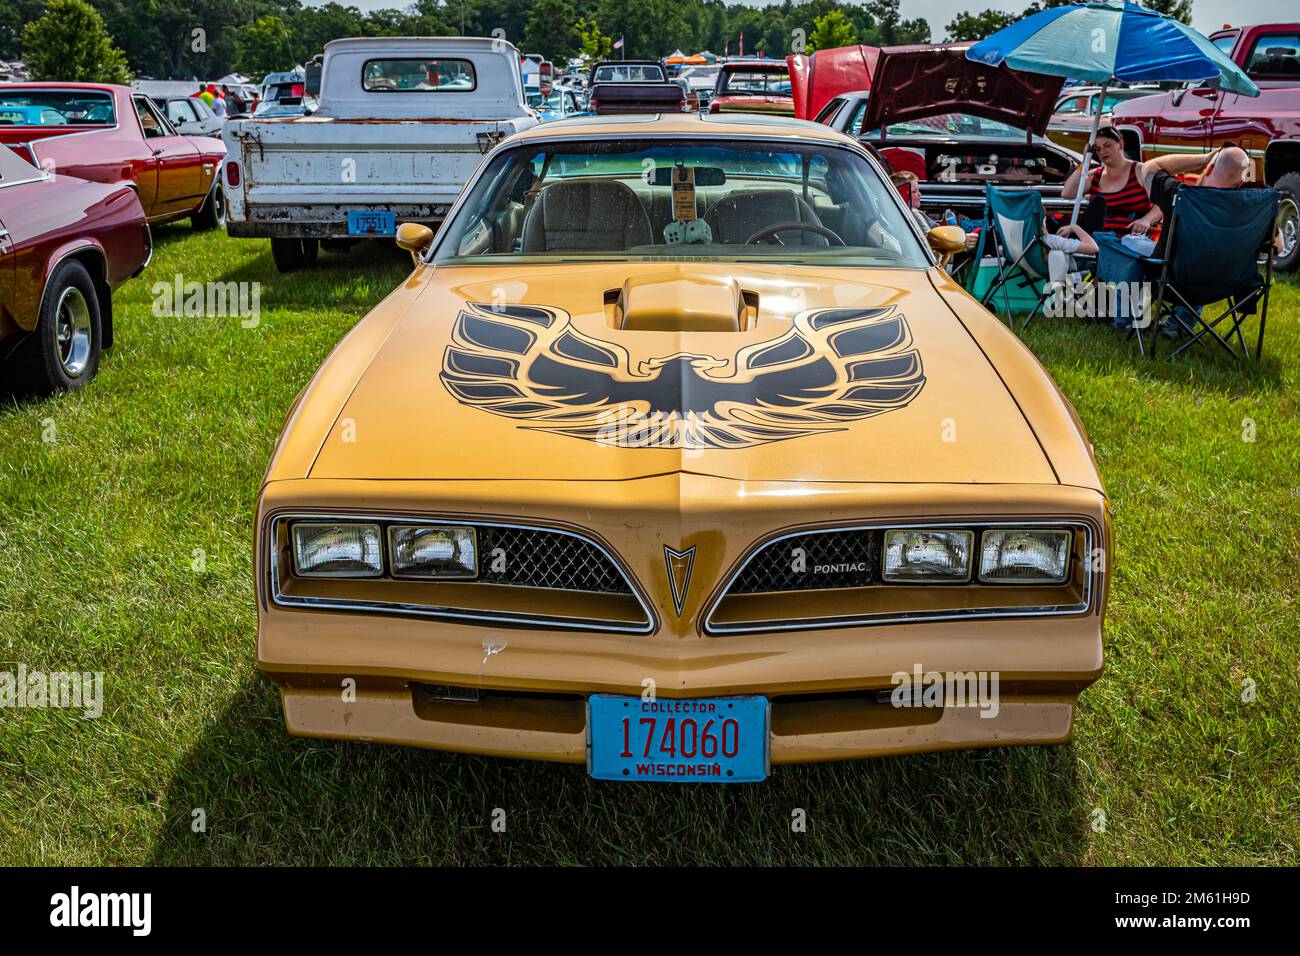 Iola, WI - July 07, 2022: High perspective front view of a 1978 Pontiac Firebird Trans Am at a local car show. Stock Photo